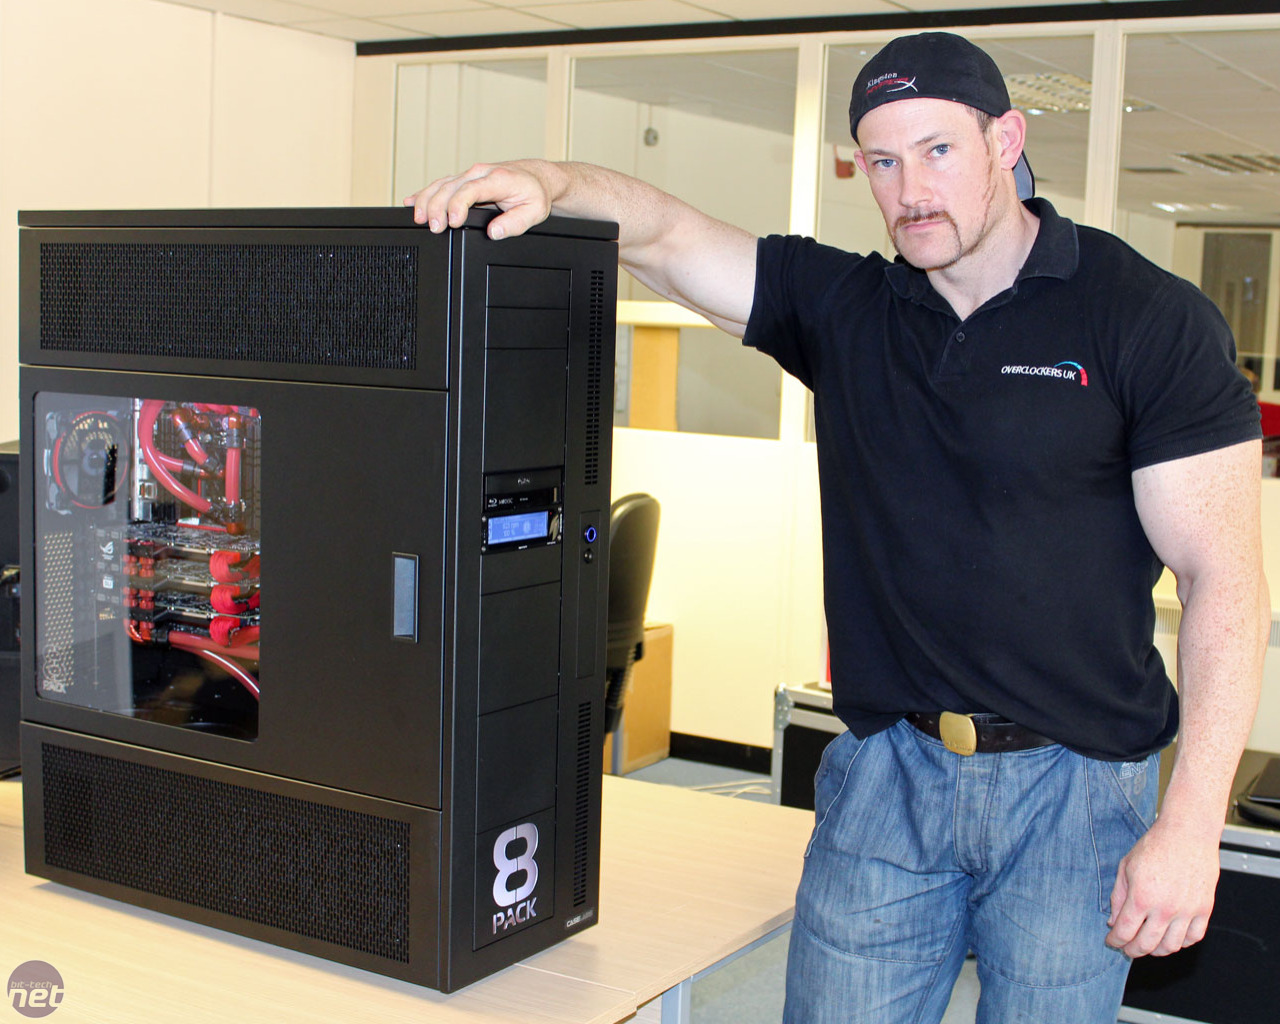 Overclockers UK 8Pack Systems Preview and Interview | bit-tech.net